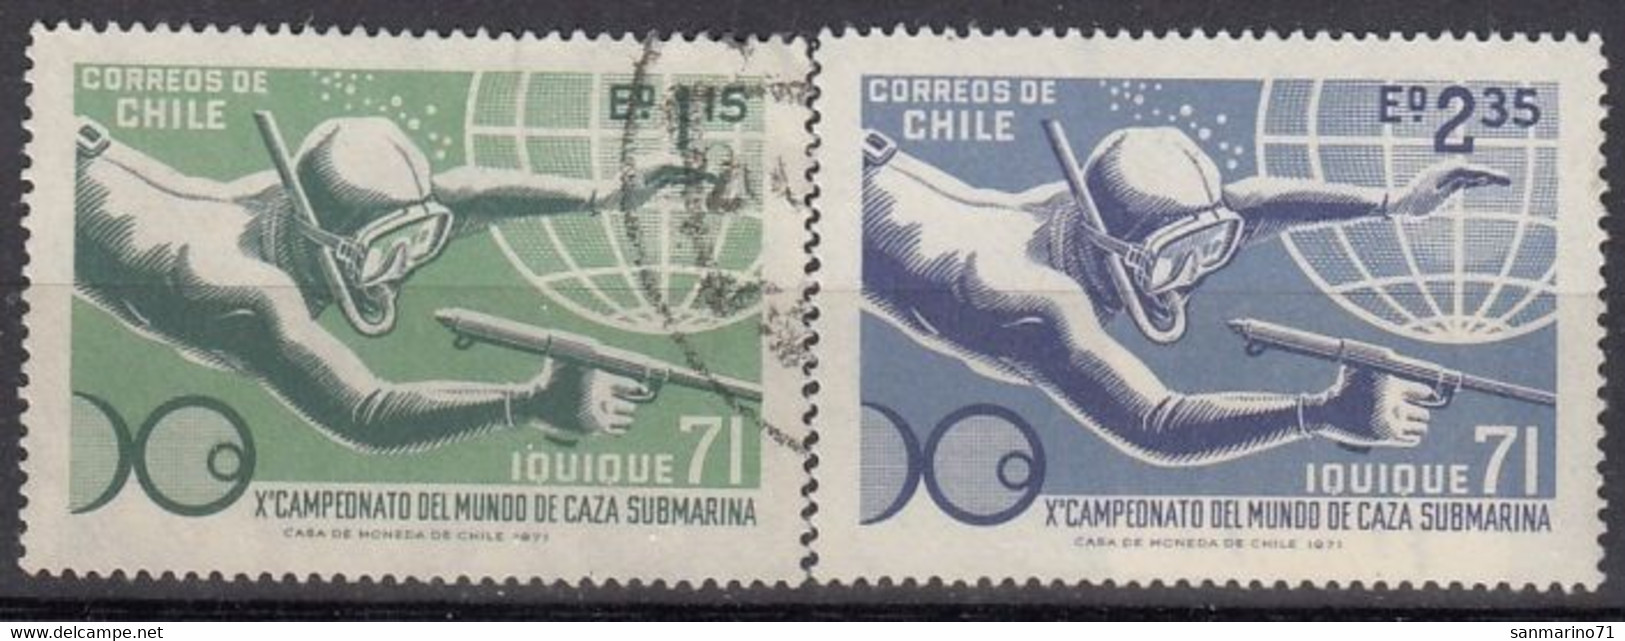 CHILE 756-757,used - Immersione